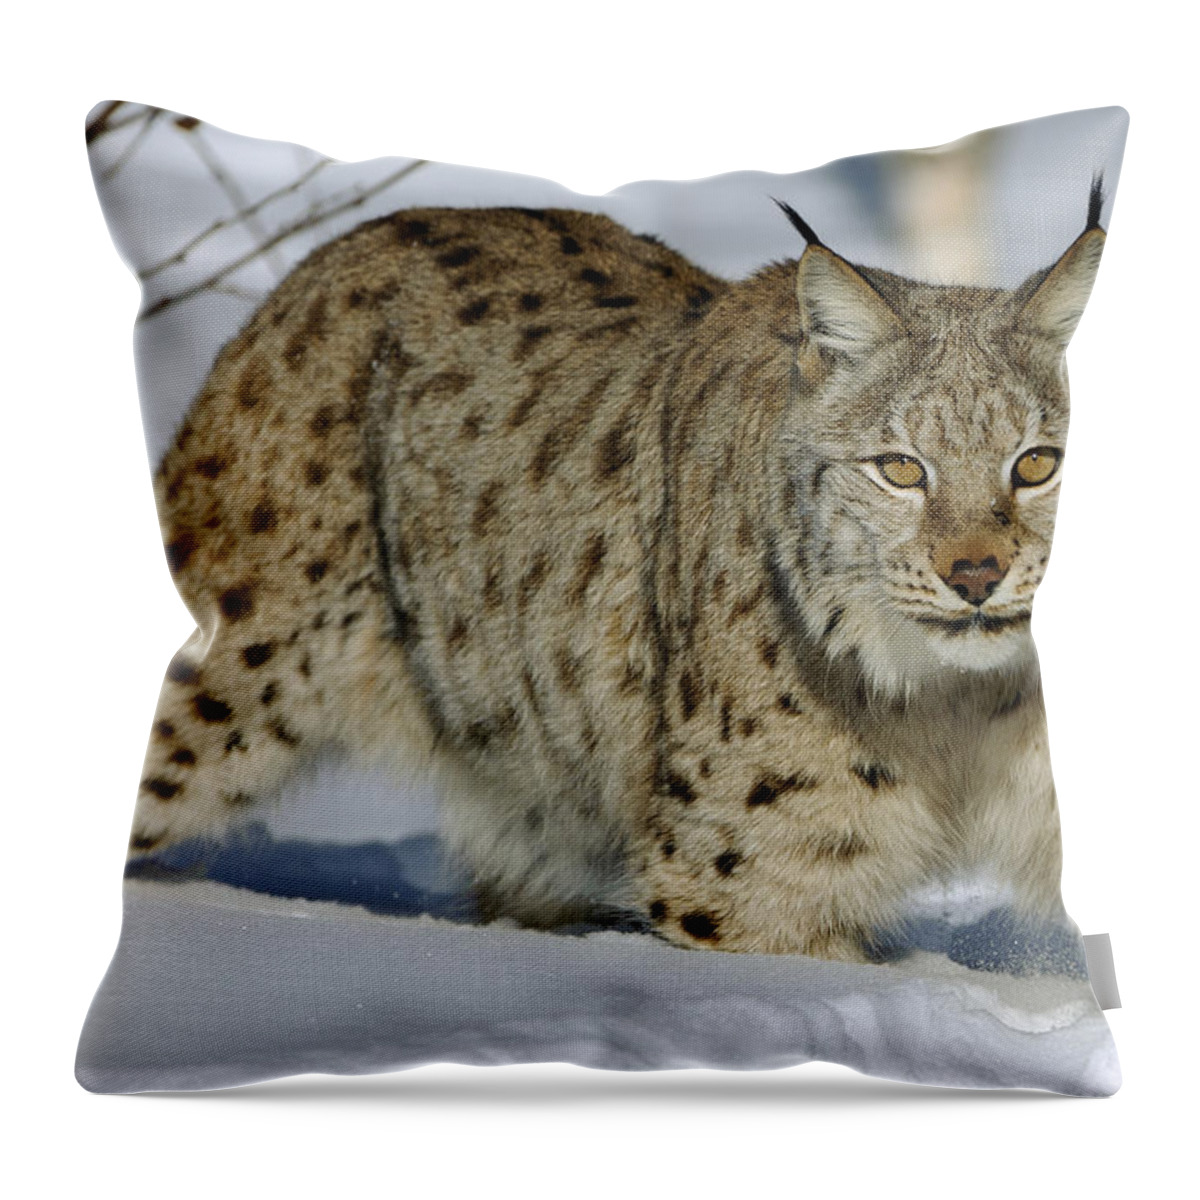 00449625 Throw Pillow featuring the photograph Eurasian Lynx In Snow by Willi Rolfes